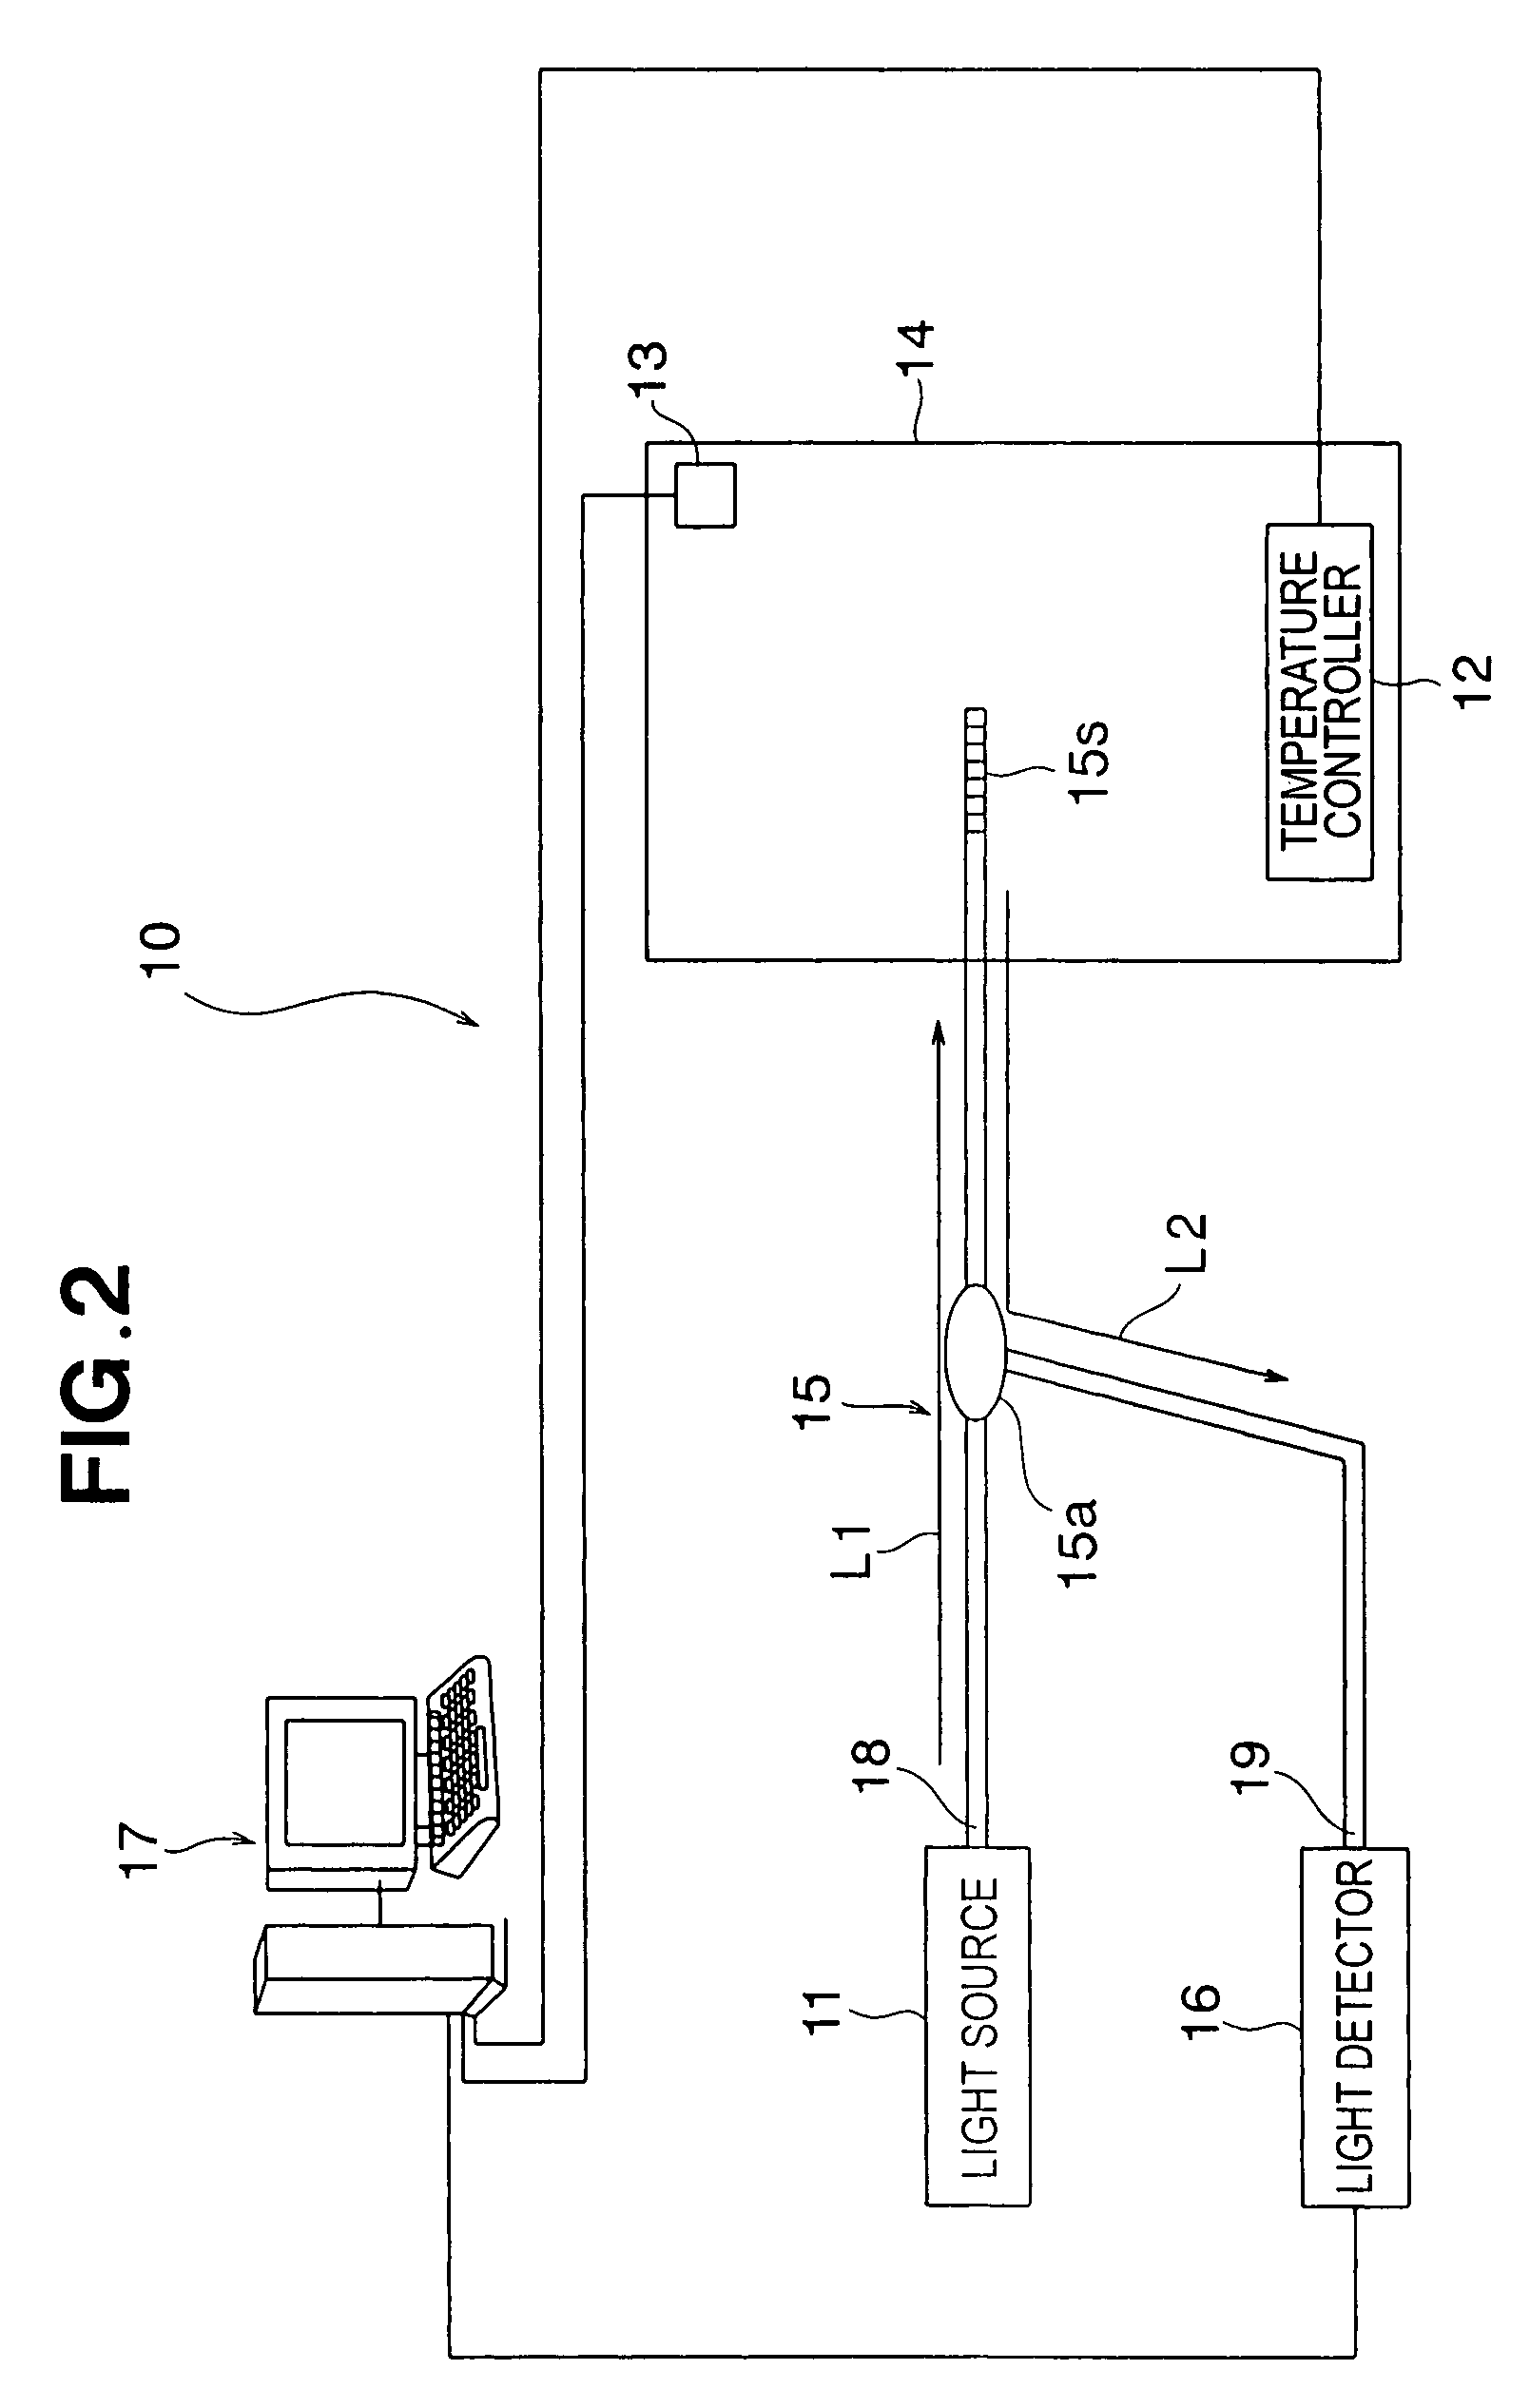 Method for inspecting peeling in adhesive joint